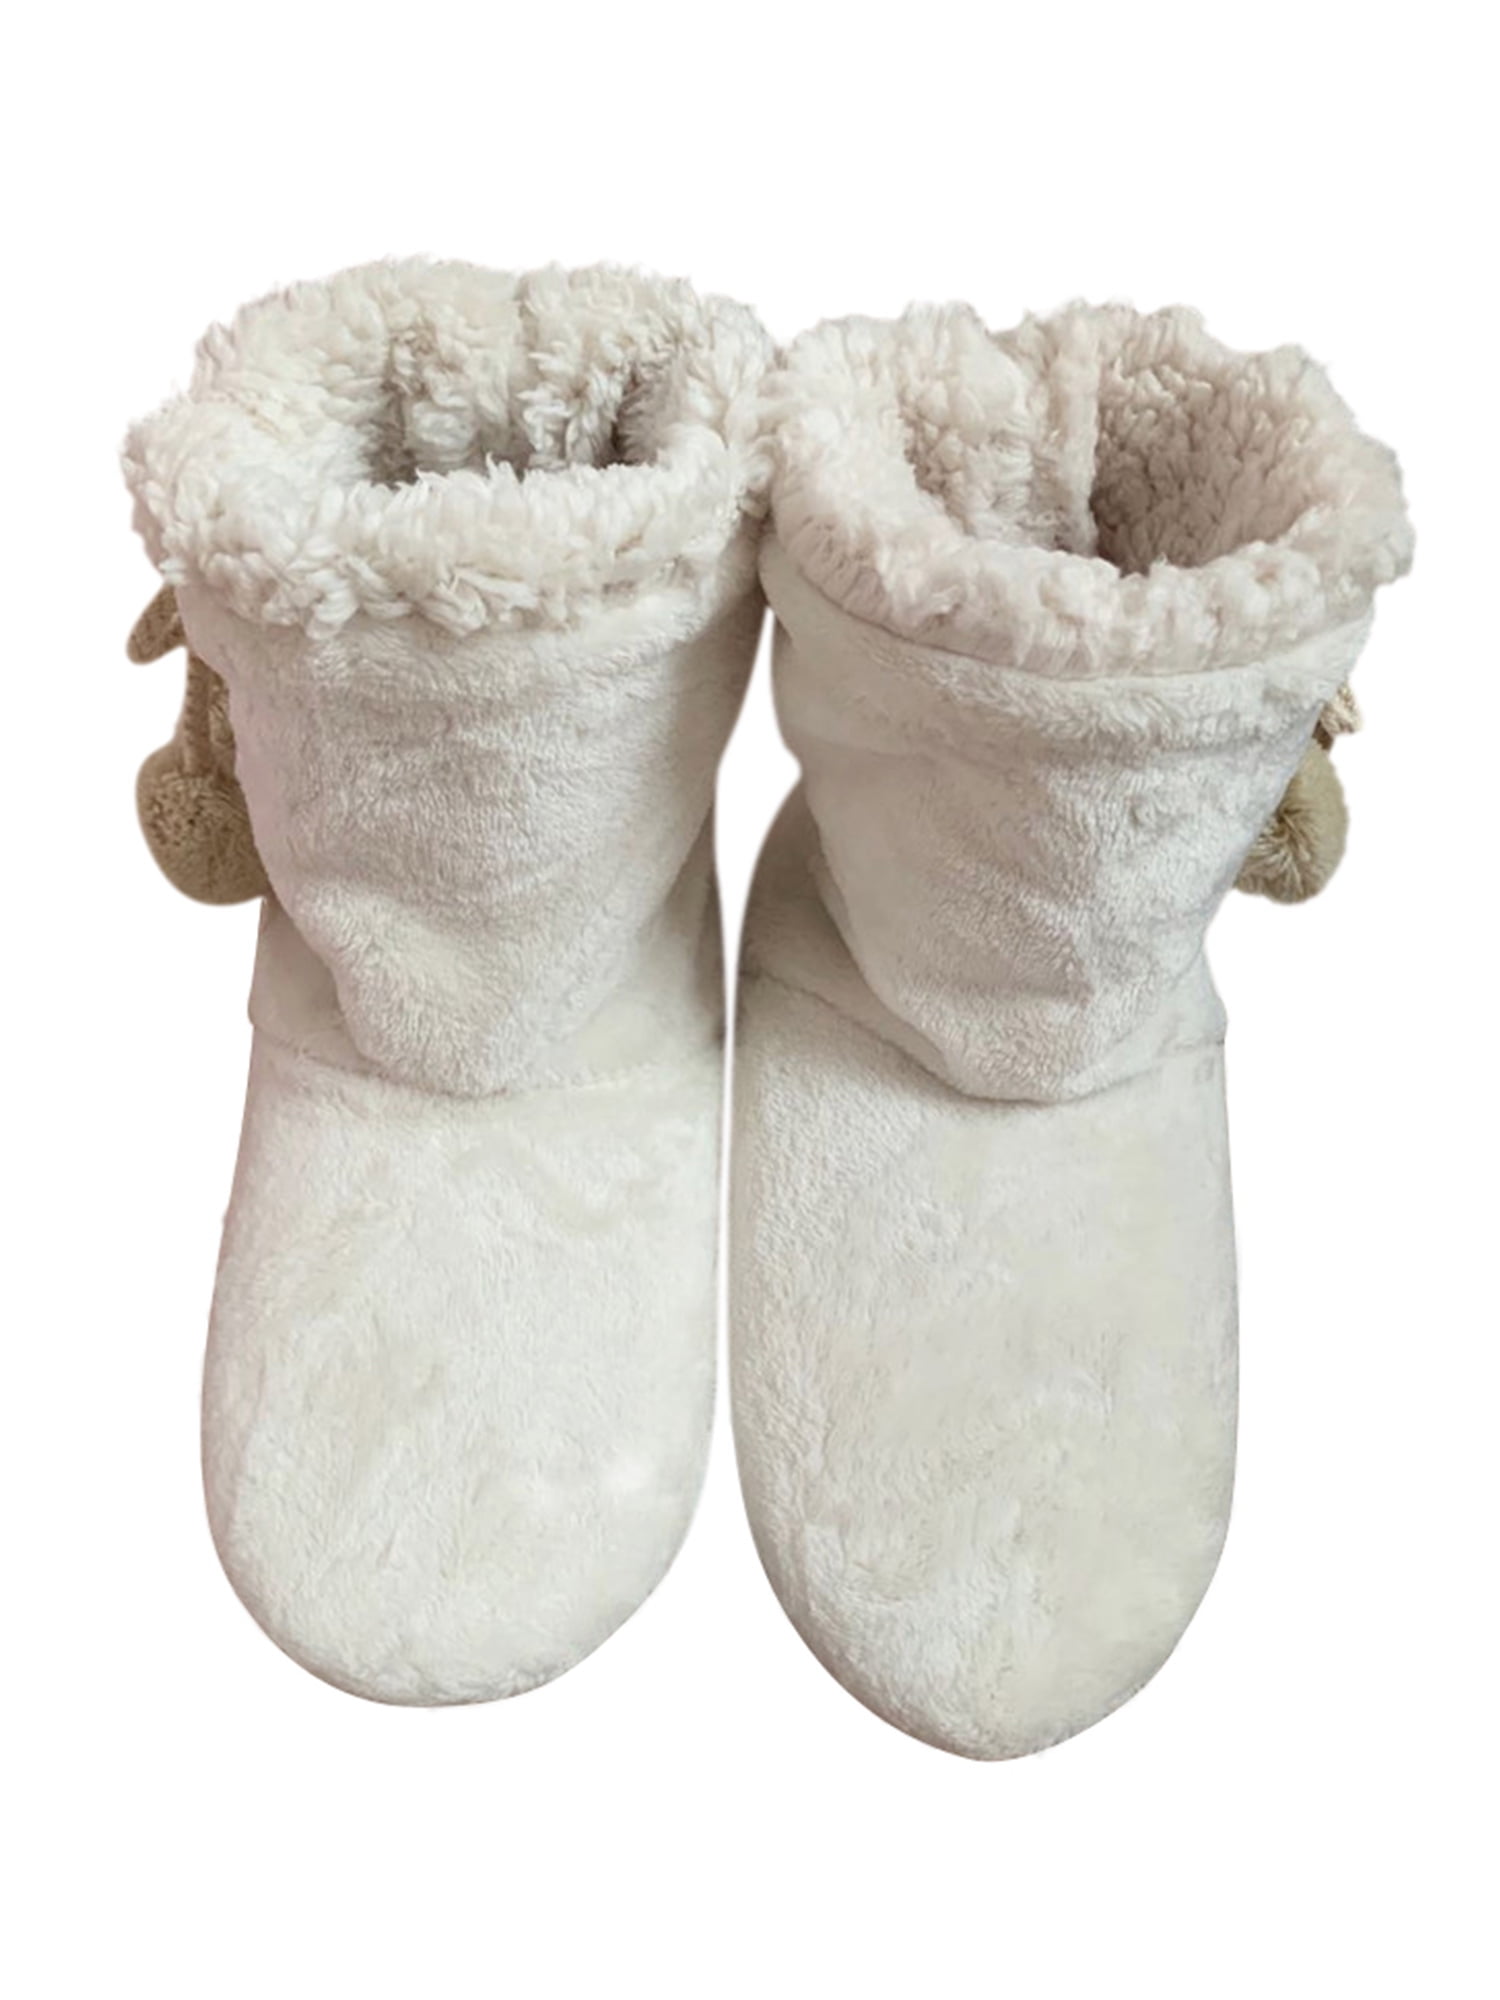 House of Slippers BOOTIE Ladies Faux Fur Lined Warm Comfy Boot Slippers Beige